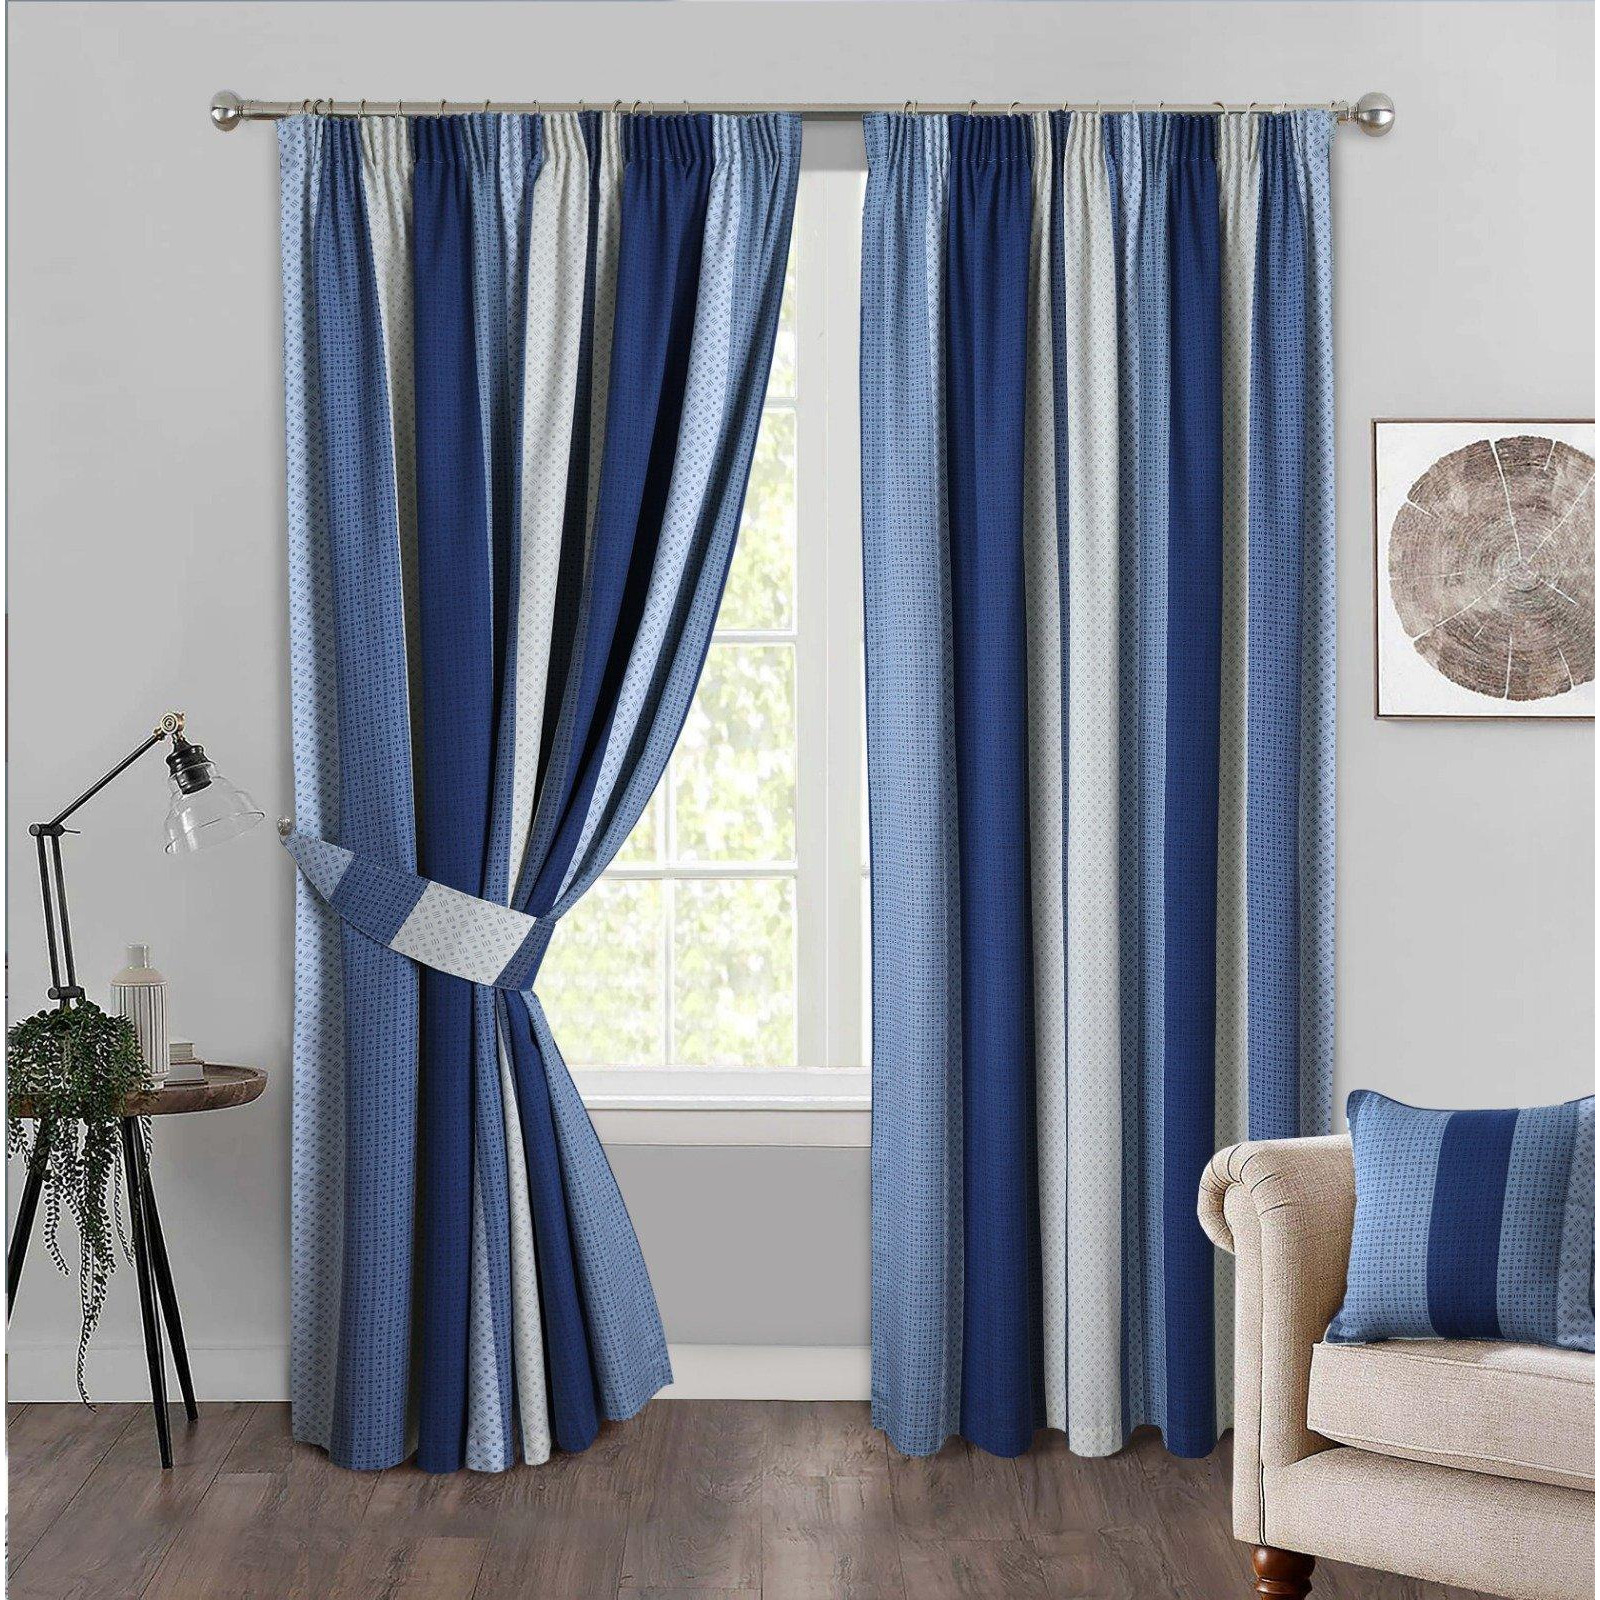 Seville Printed Fully Lined 3 Inches Pencil Pleat  curtains with Tiebacks included pair - image 1